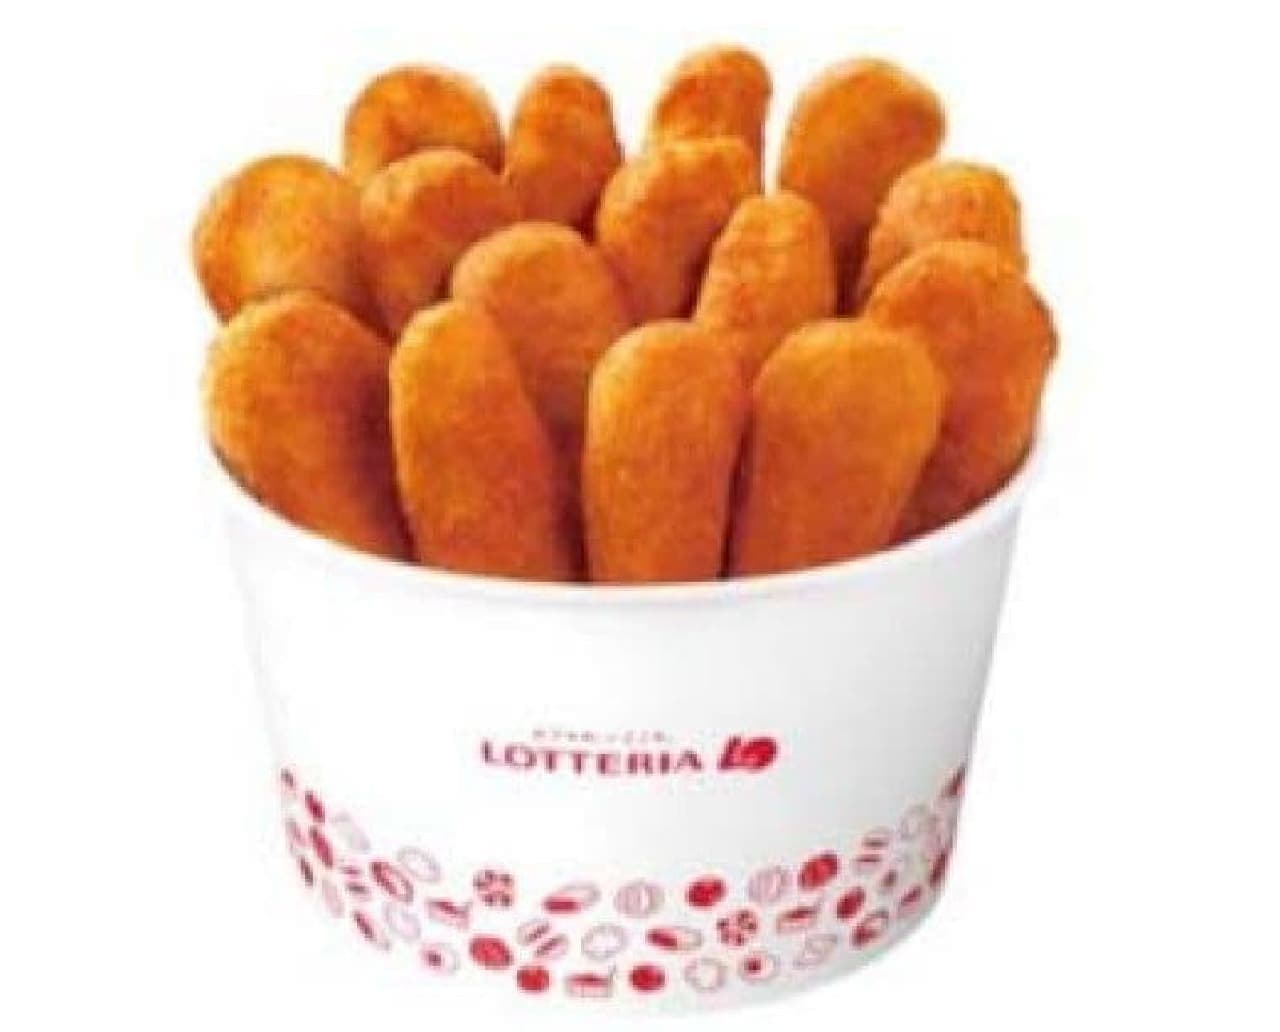 Lotteria "Give it from a bucket chicken"